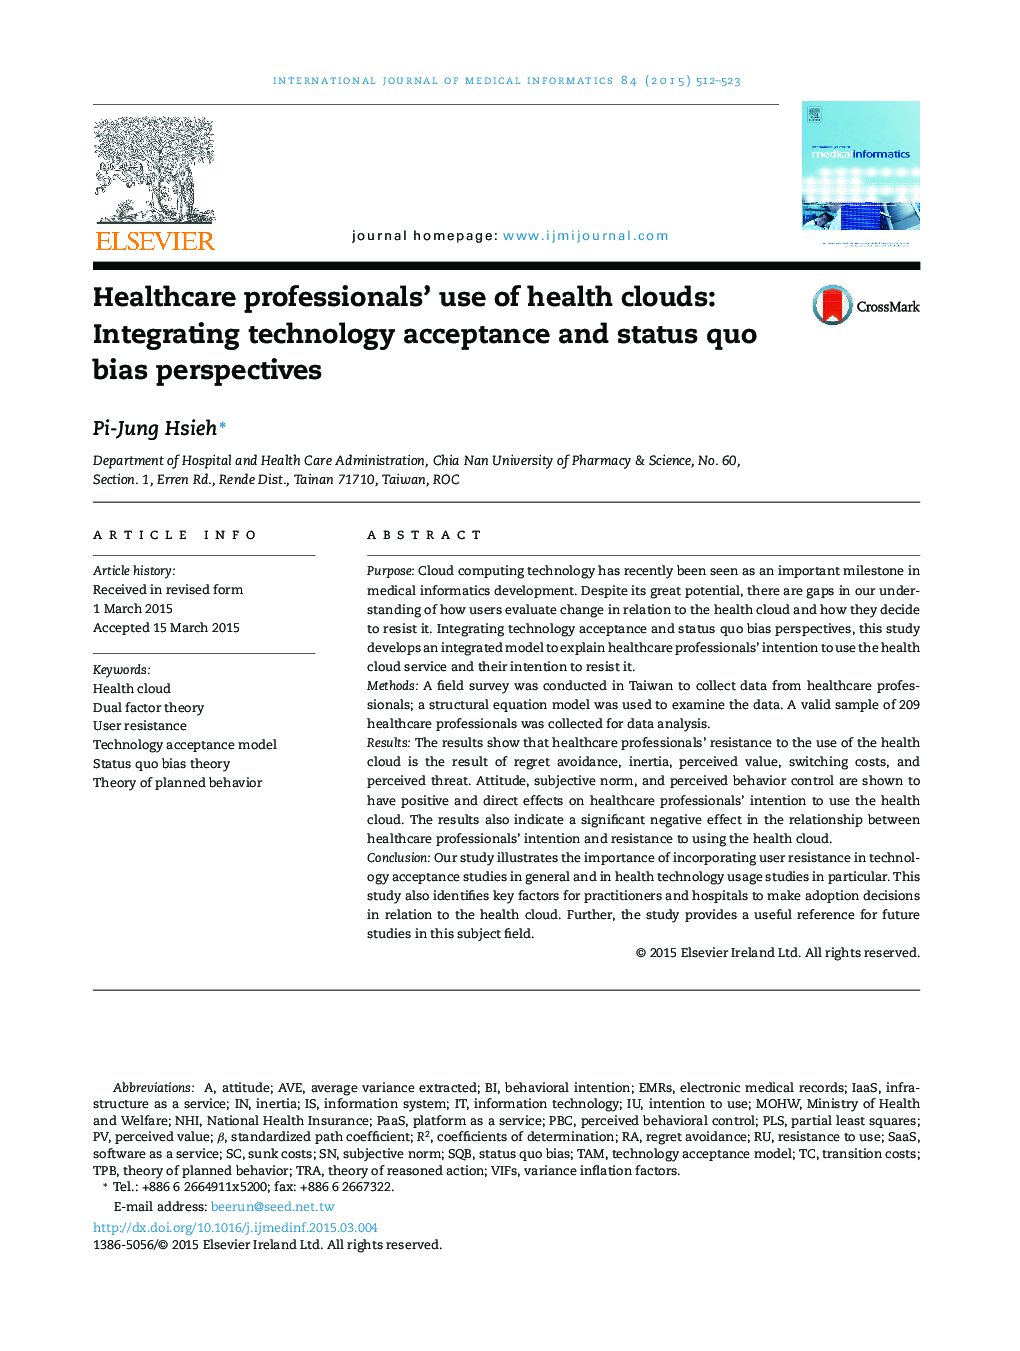 Healthcare professionals’ use of health clouds: Integrating technology acceptance and status quo bias perspectives